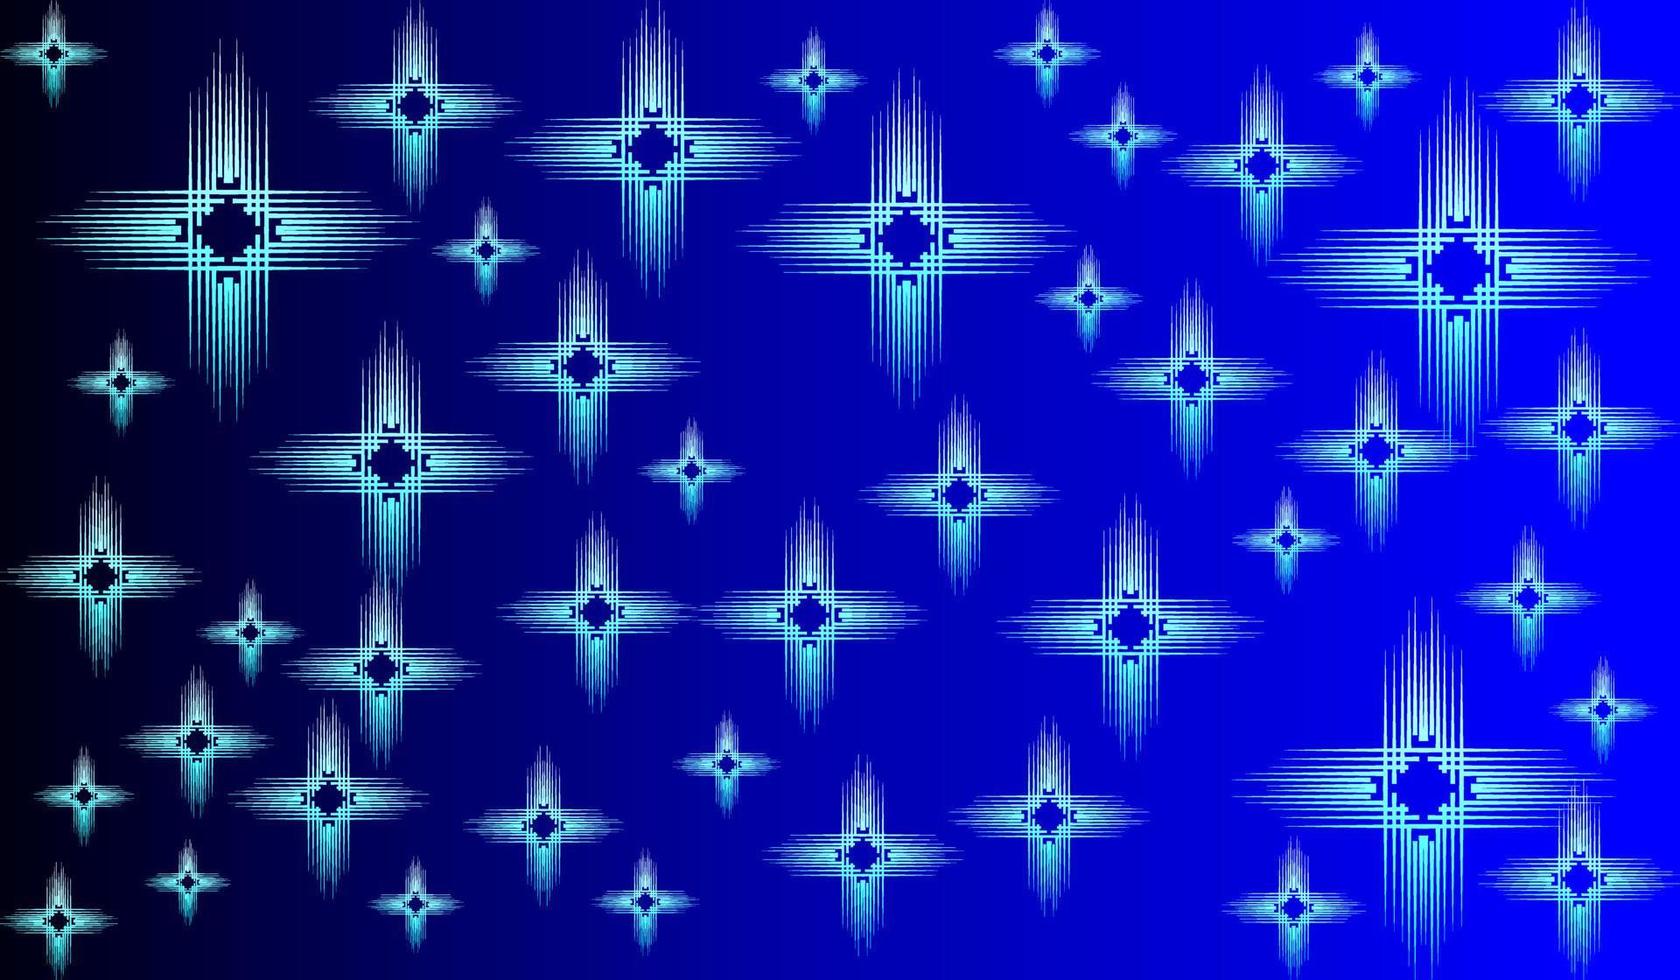 dark blue shining star background. Creative, attractive and modern illustrations. Textures to complement your business or design needs vector